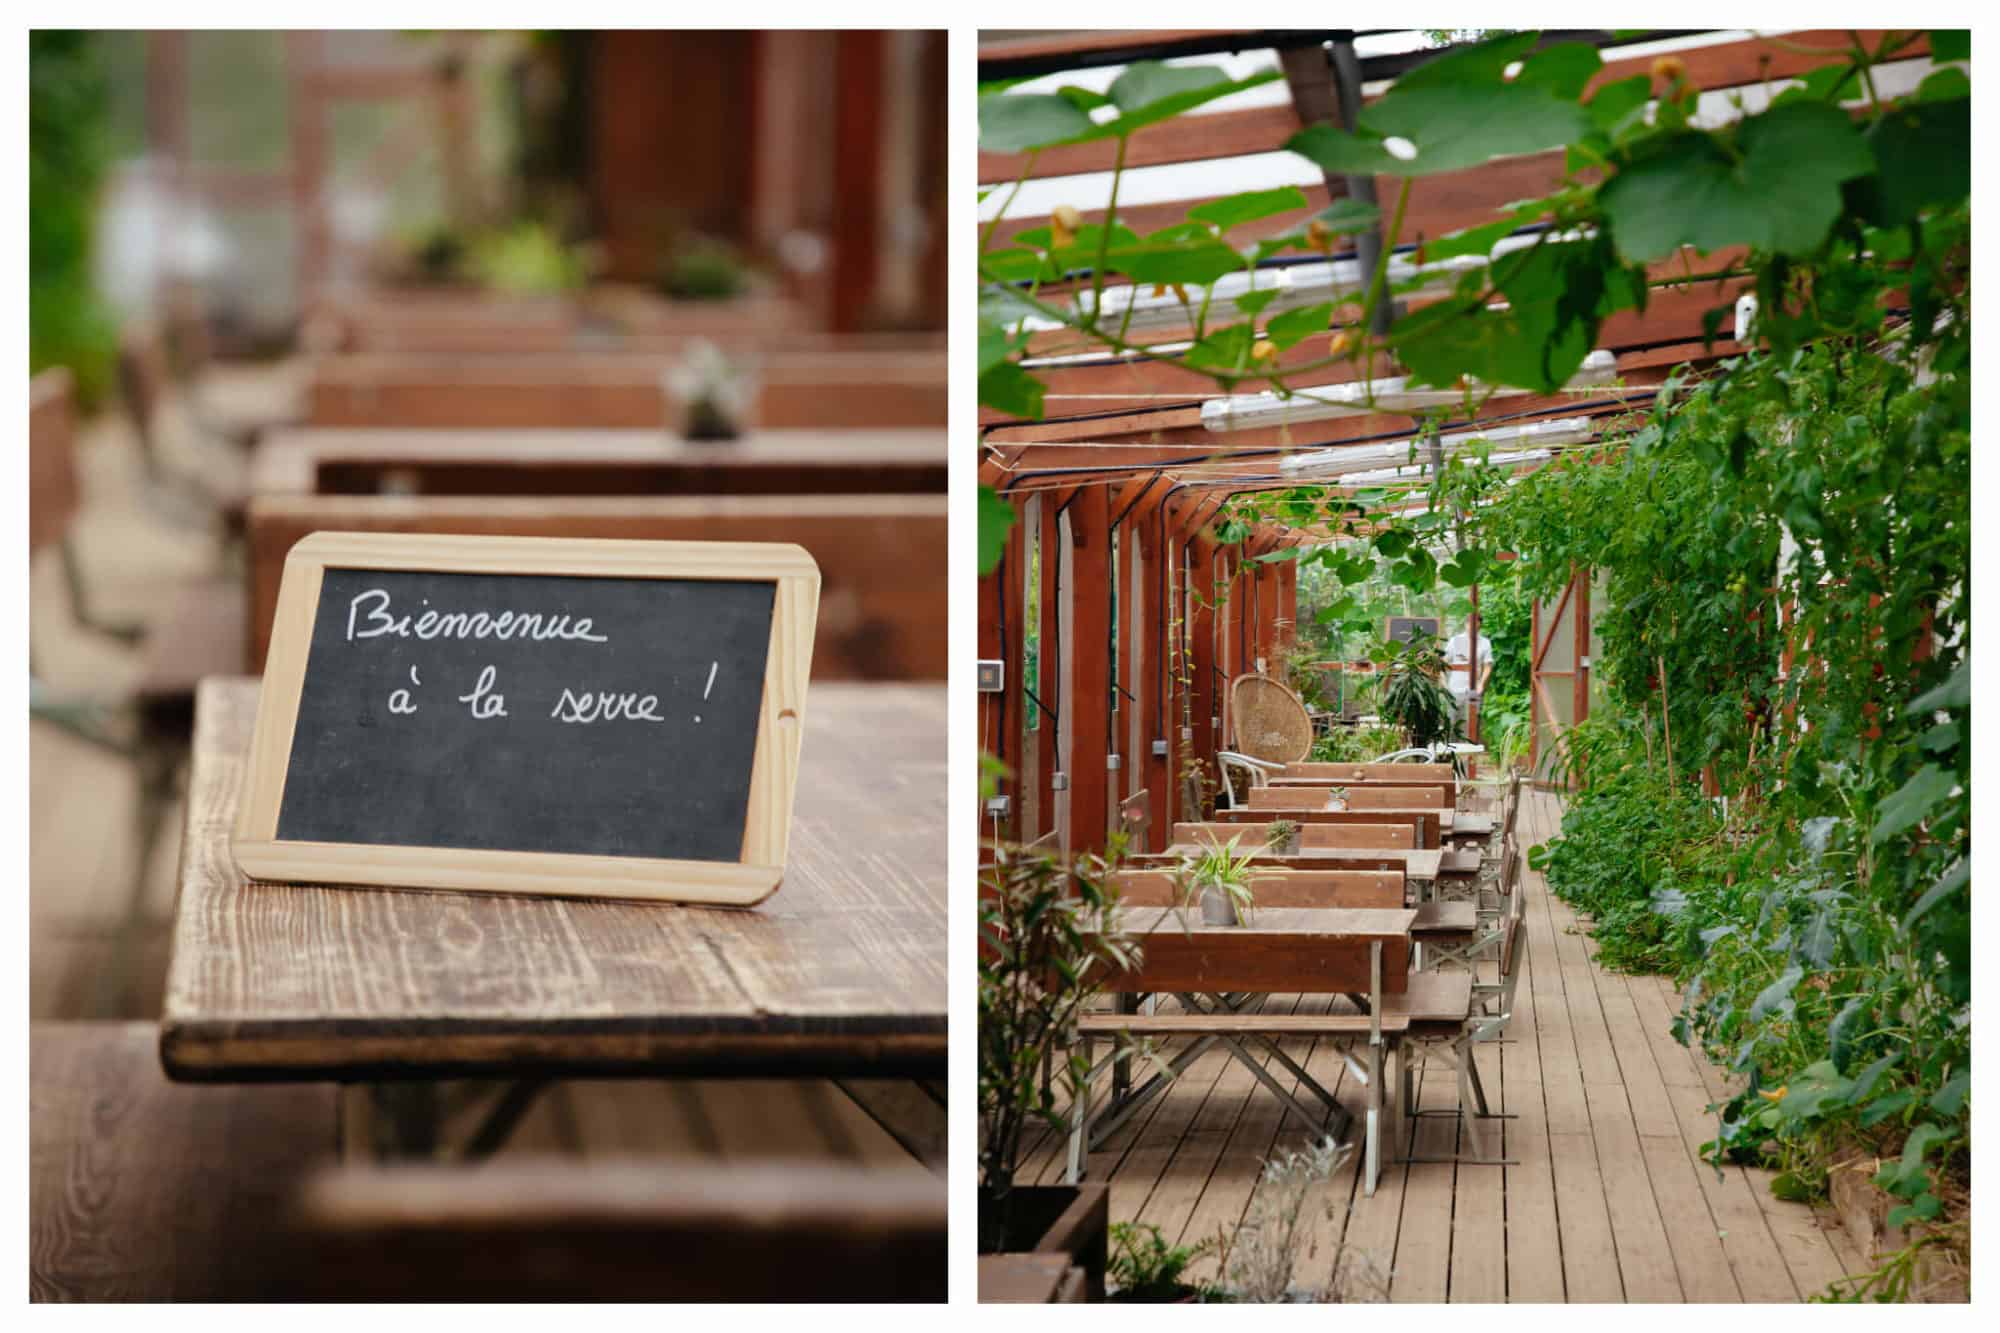 On left: A rustic chalkboard sign welcomes visitors to the greenhouse of La REcyclerie in Paris' 18th arrondissement. On right: Empty farm tables await in the greenhouse of La REcyclerie. 